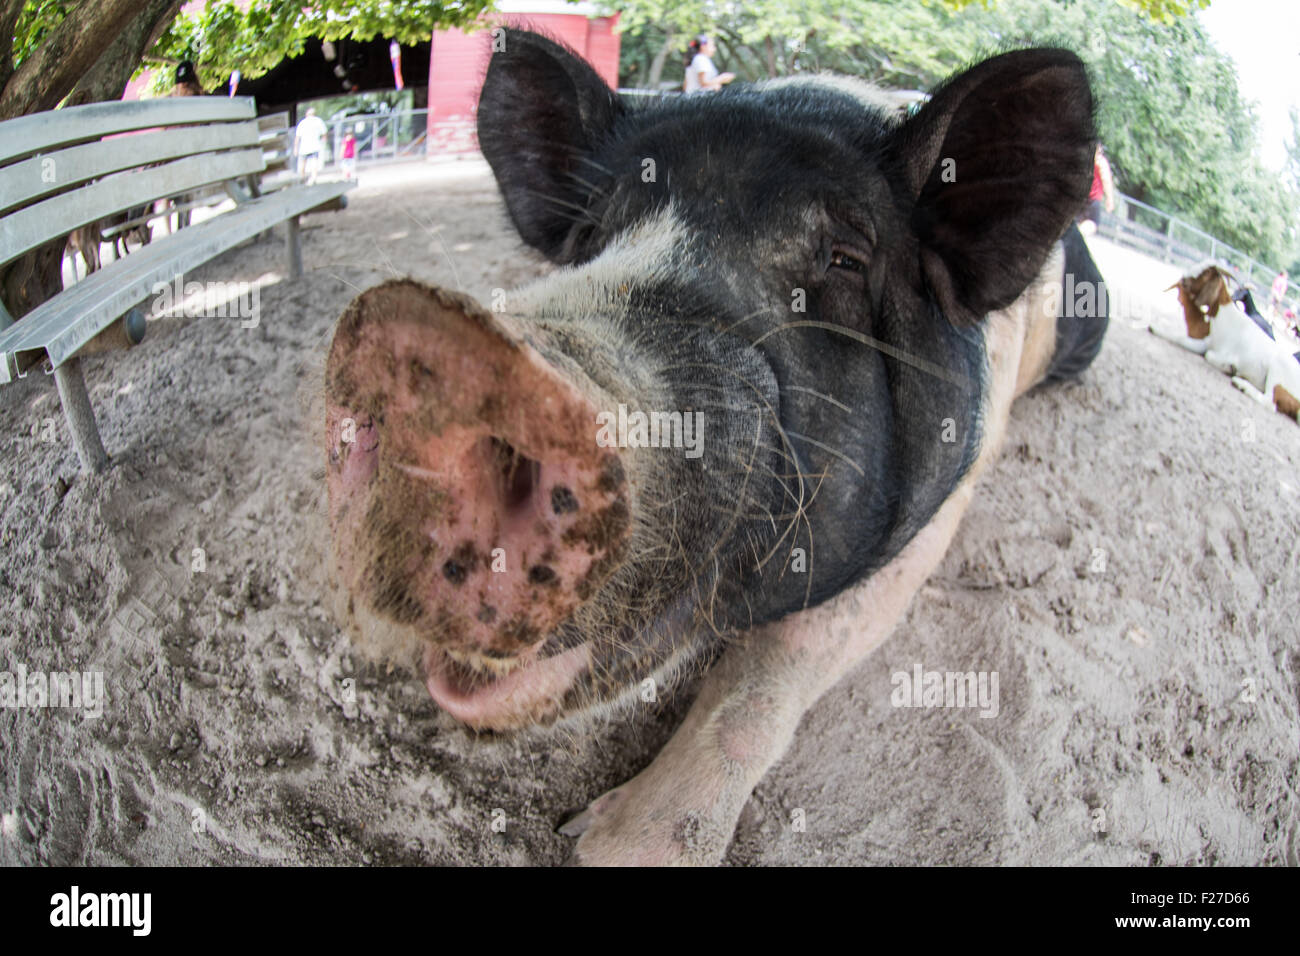 Funny farm animals. Wide angel close-up view of a hog Stock Photo - Alamy